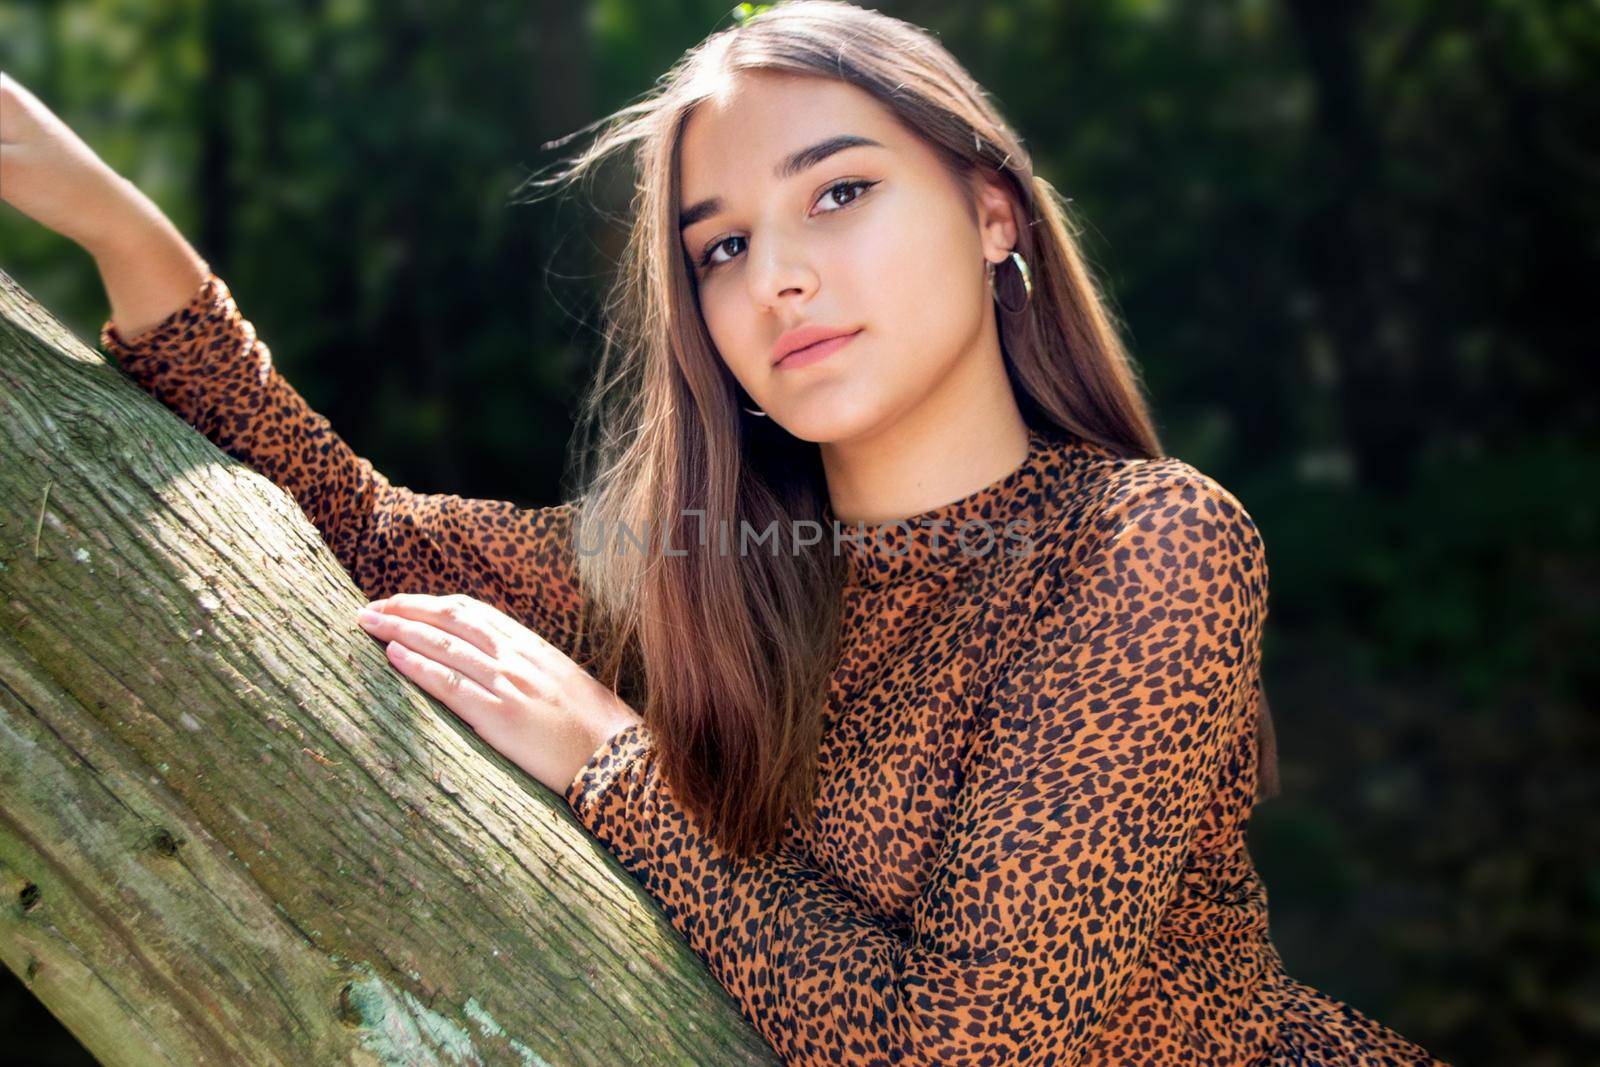 Emotional girl teenager with long hair hairstyle braids in a green shirt sits on a bench in the park. by milastokerpro